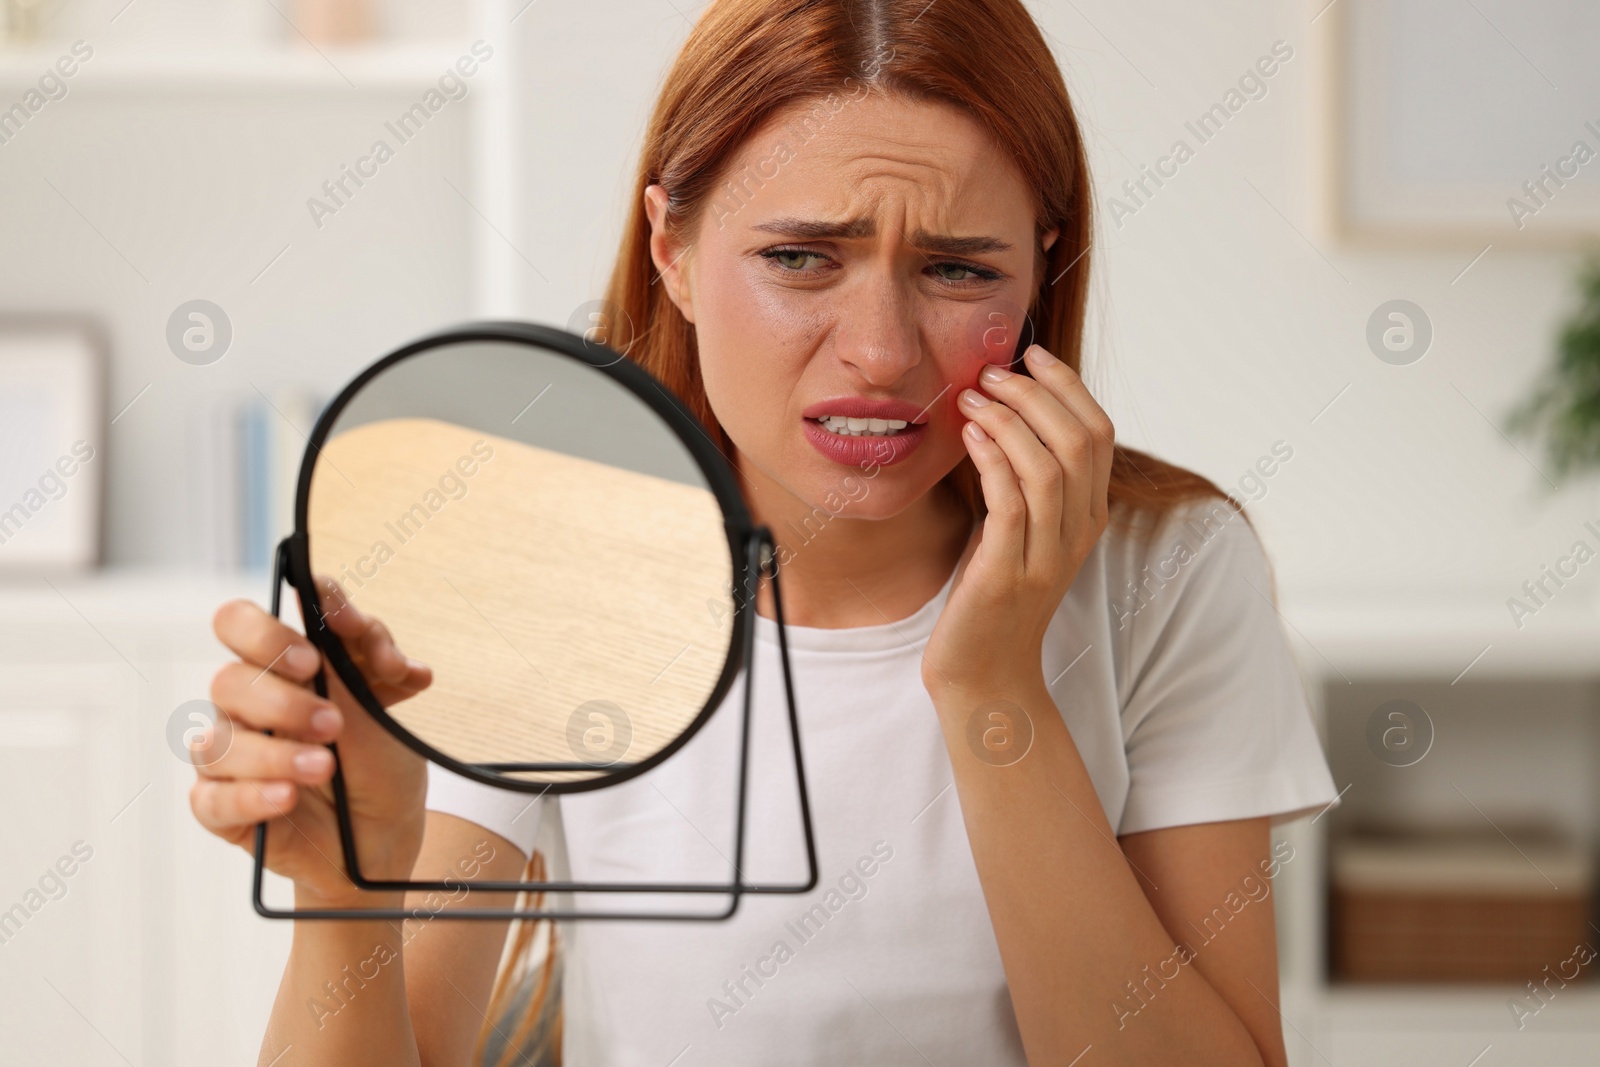 Photo of Suffering from allergy. Young woman looking in mirror and scratching her face at home